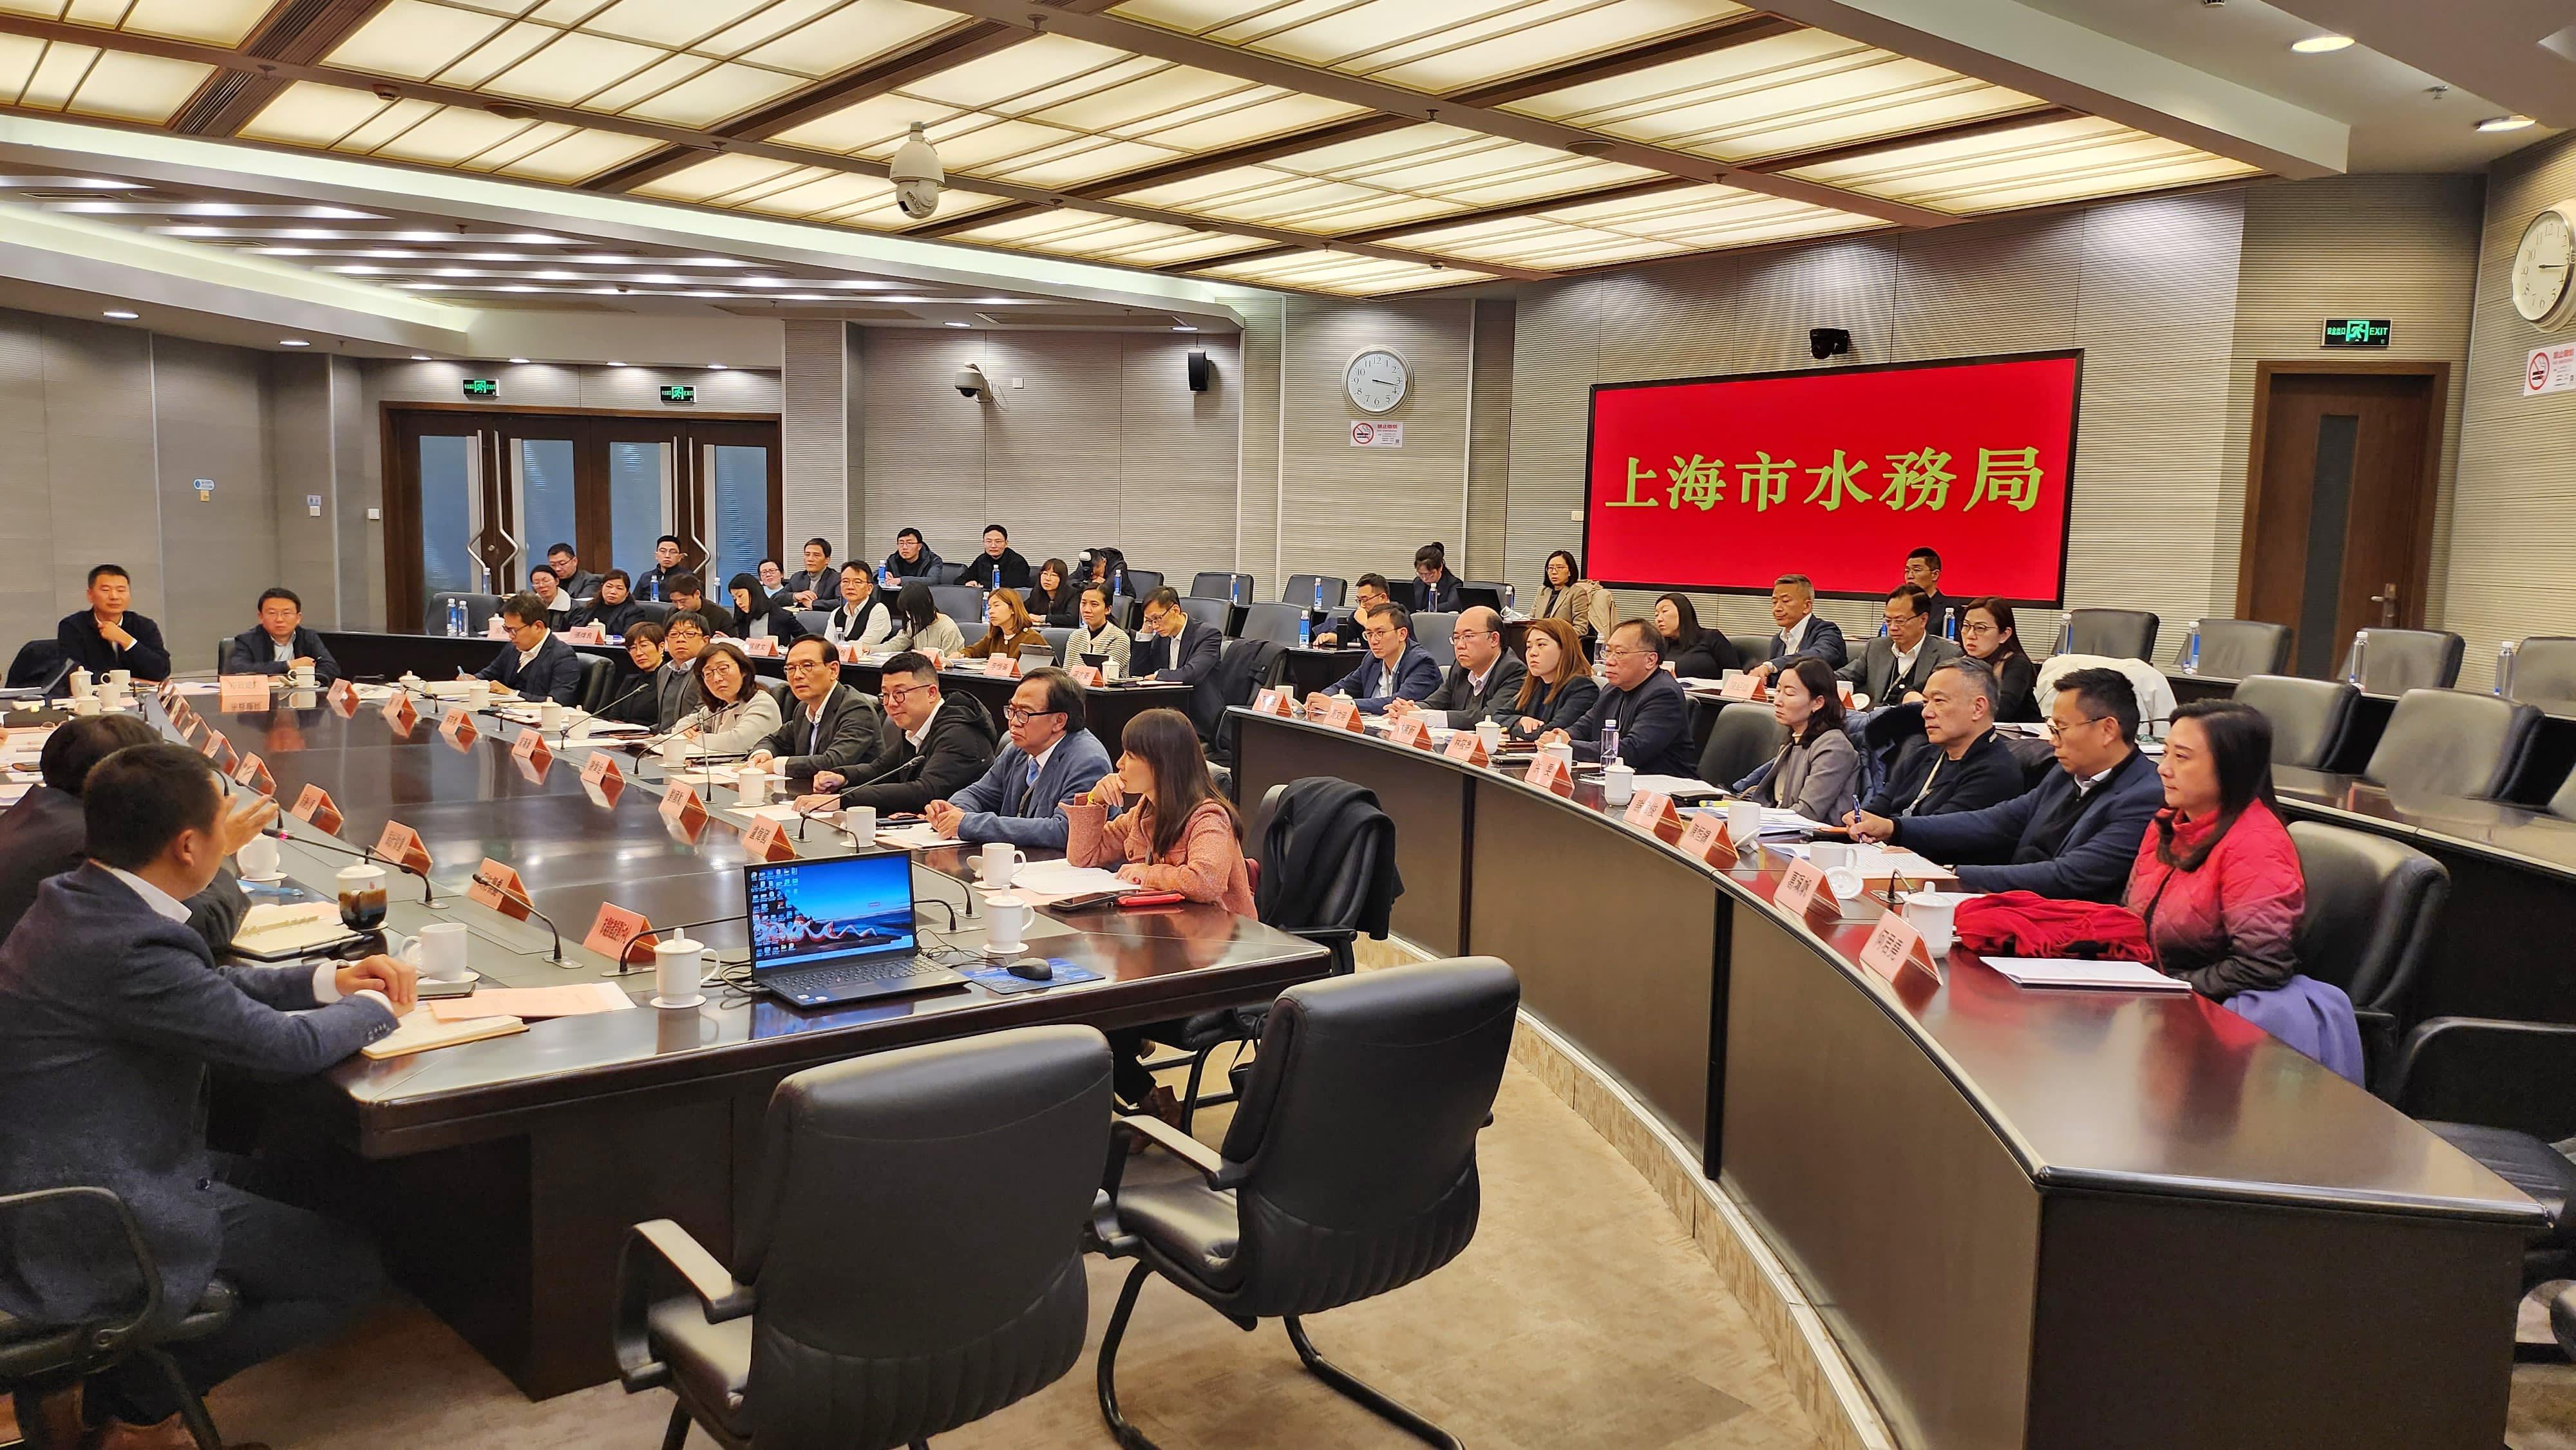 The delegation of the Legislative Council Panel on Development begins the three-day duty visit to Shanghai today (December 19). Photo shows the delegation meeting and exchanging views with the representatives of the Shanghai Water Authority.